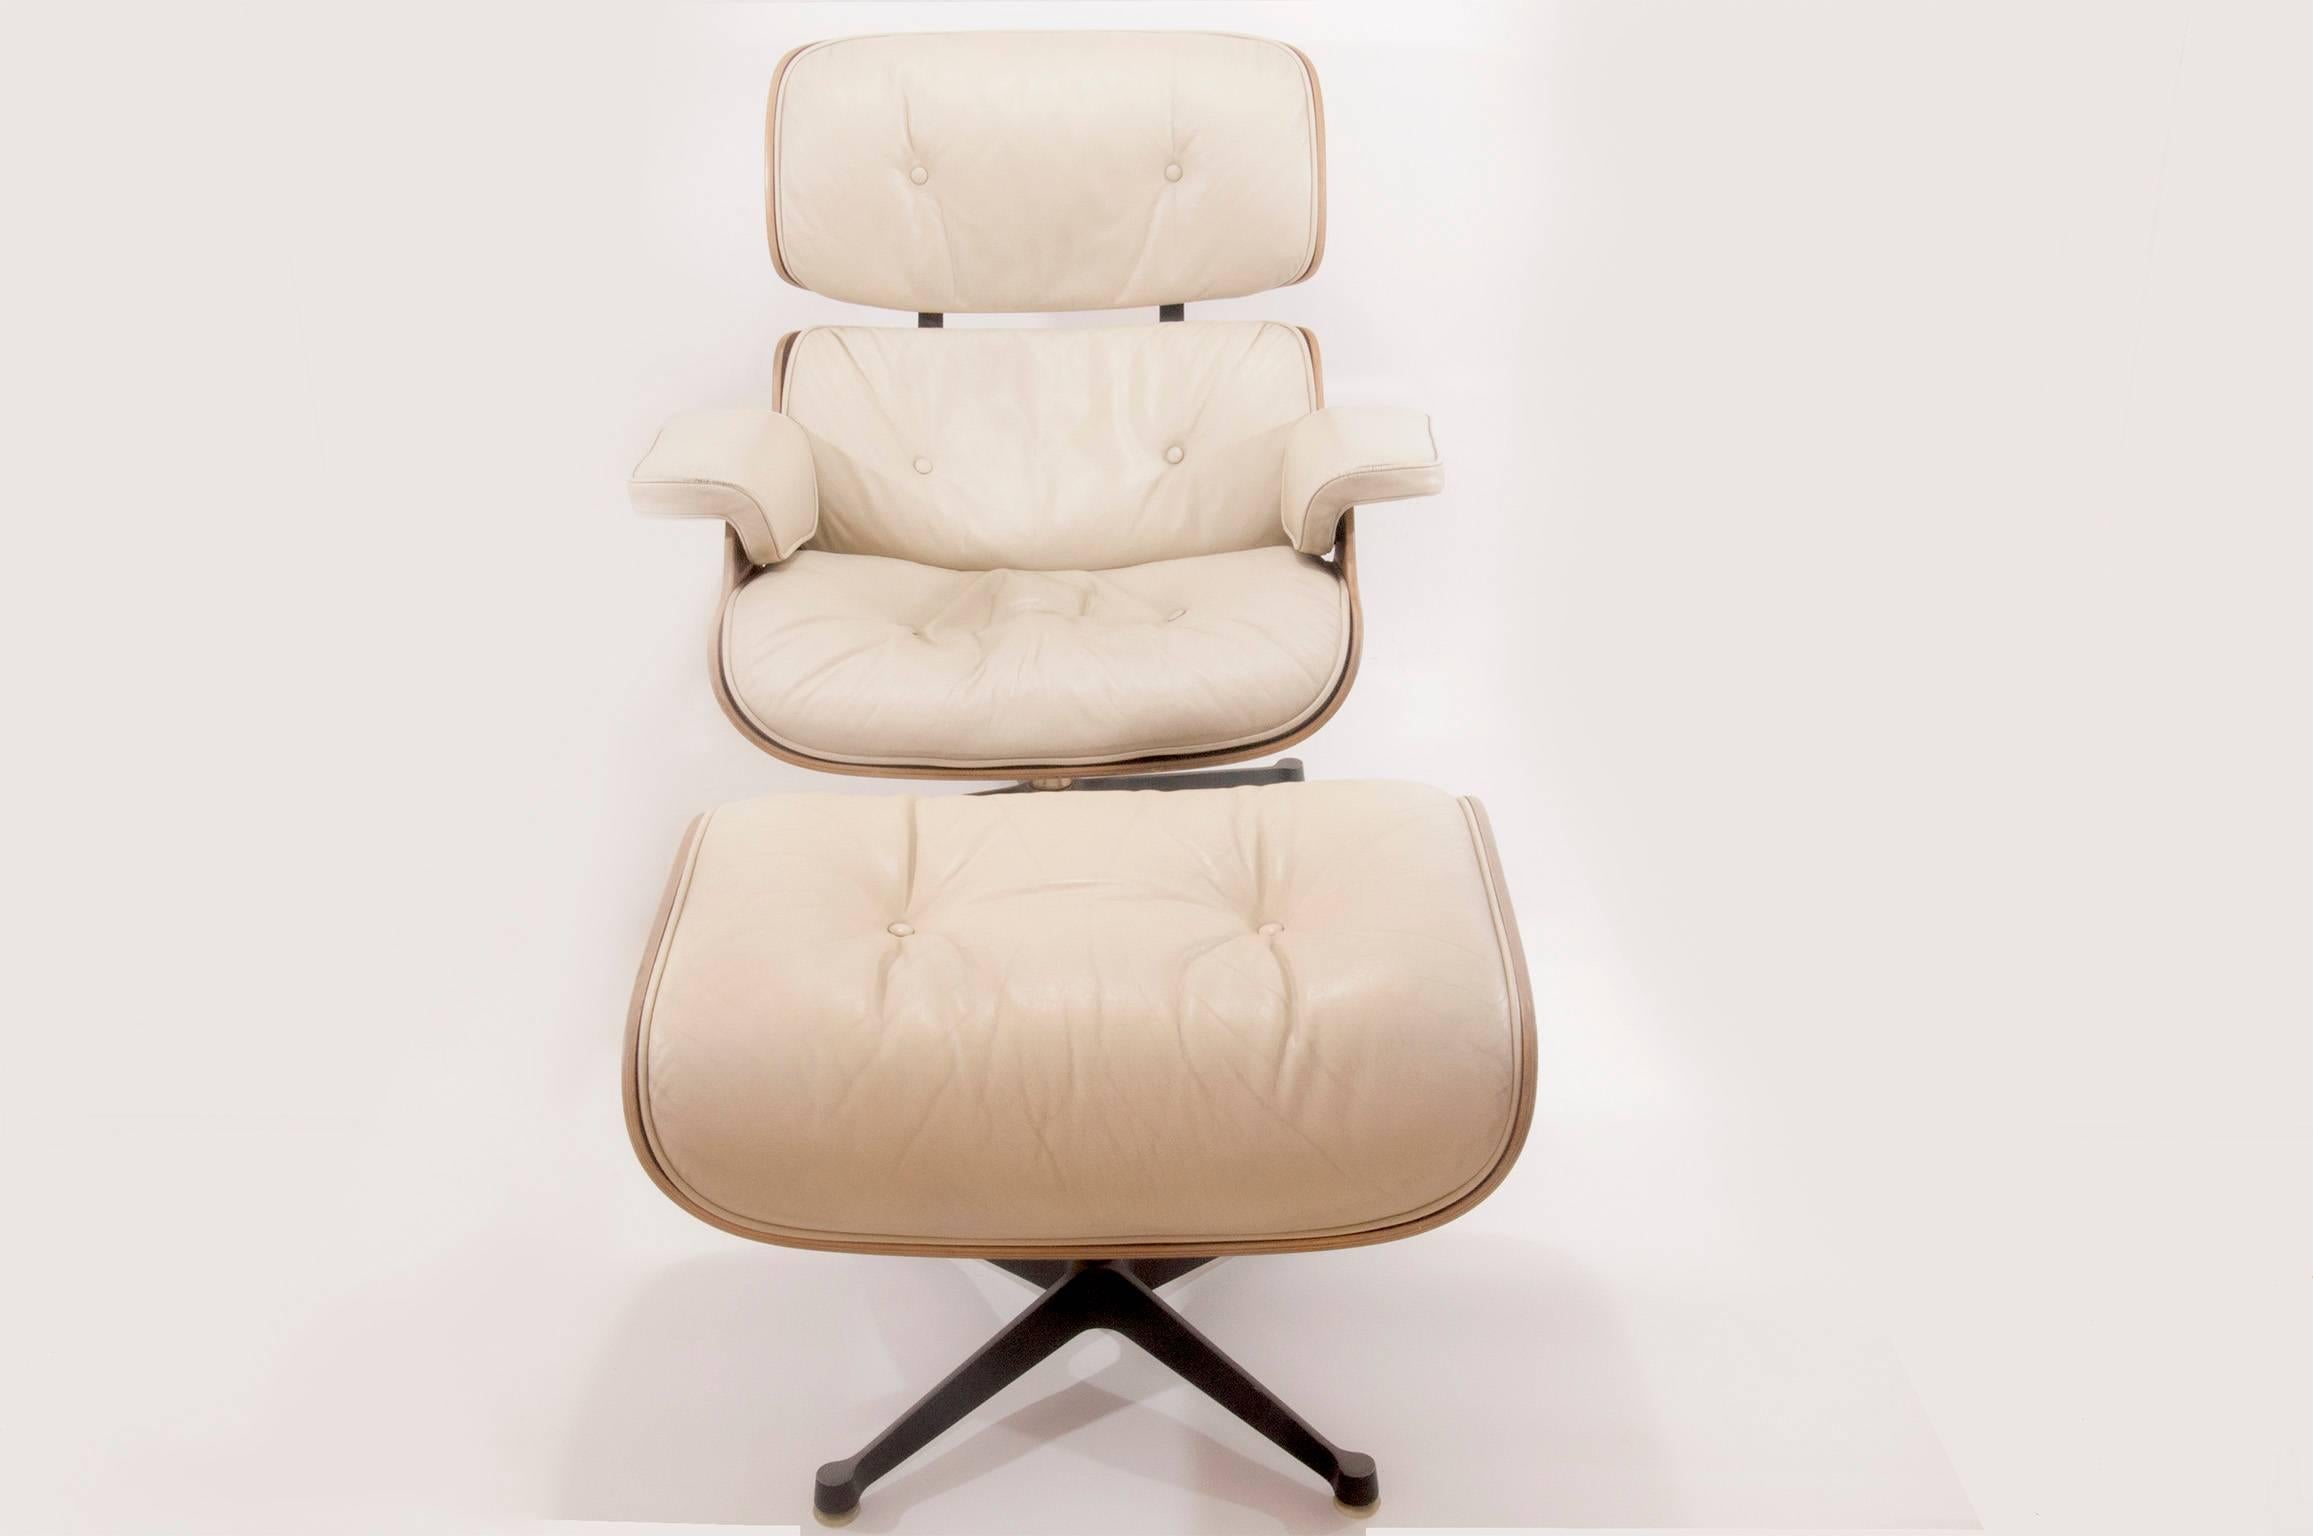 Cushions made of plumes

Mobilier International started producing Herman Miller furniture in the early 1960s until 1989-1990, under the official Licence.
Lounge chair designed by Charles and Ray Eames, France, 1960s.

An early example of the Eames